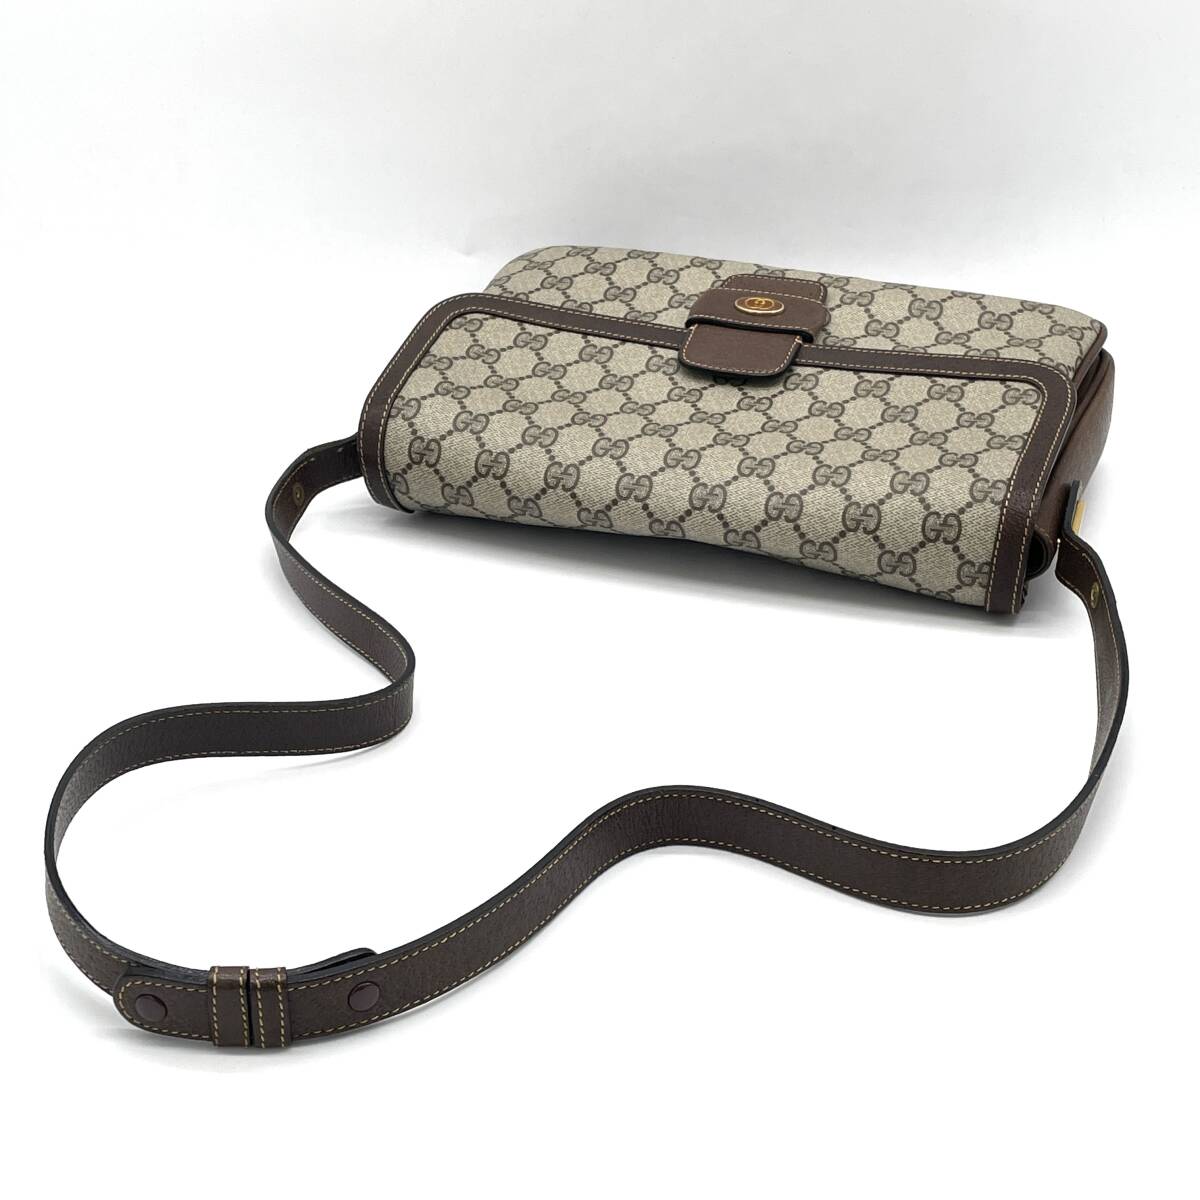 1 jpy .. none ultimate beautiful goods GUCCI Old Gucci GG pattern Brown 2way shoulder bag Inter locking G Gold metal fittings 